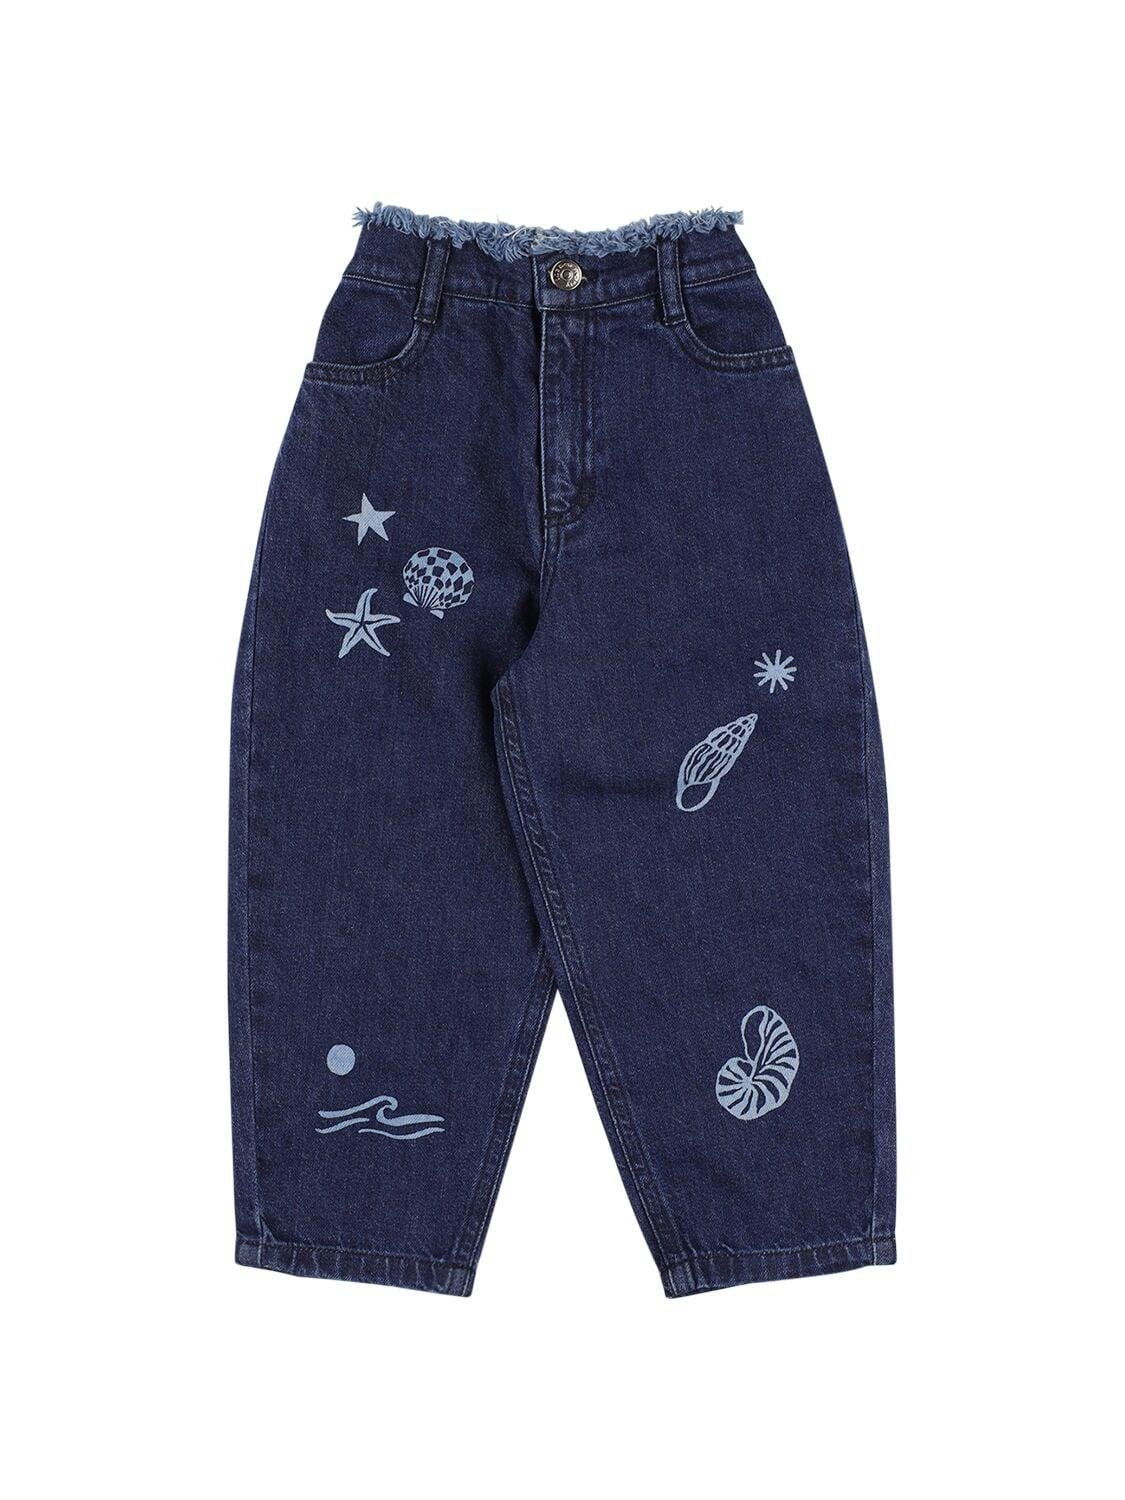 Embroidered Bci Cotton Jeans by THE NEW SOCIETY